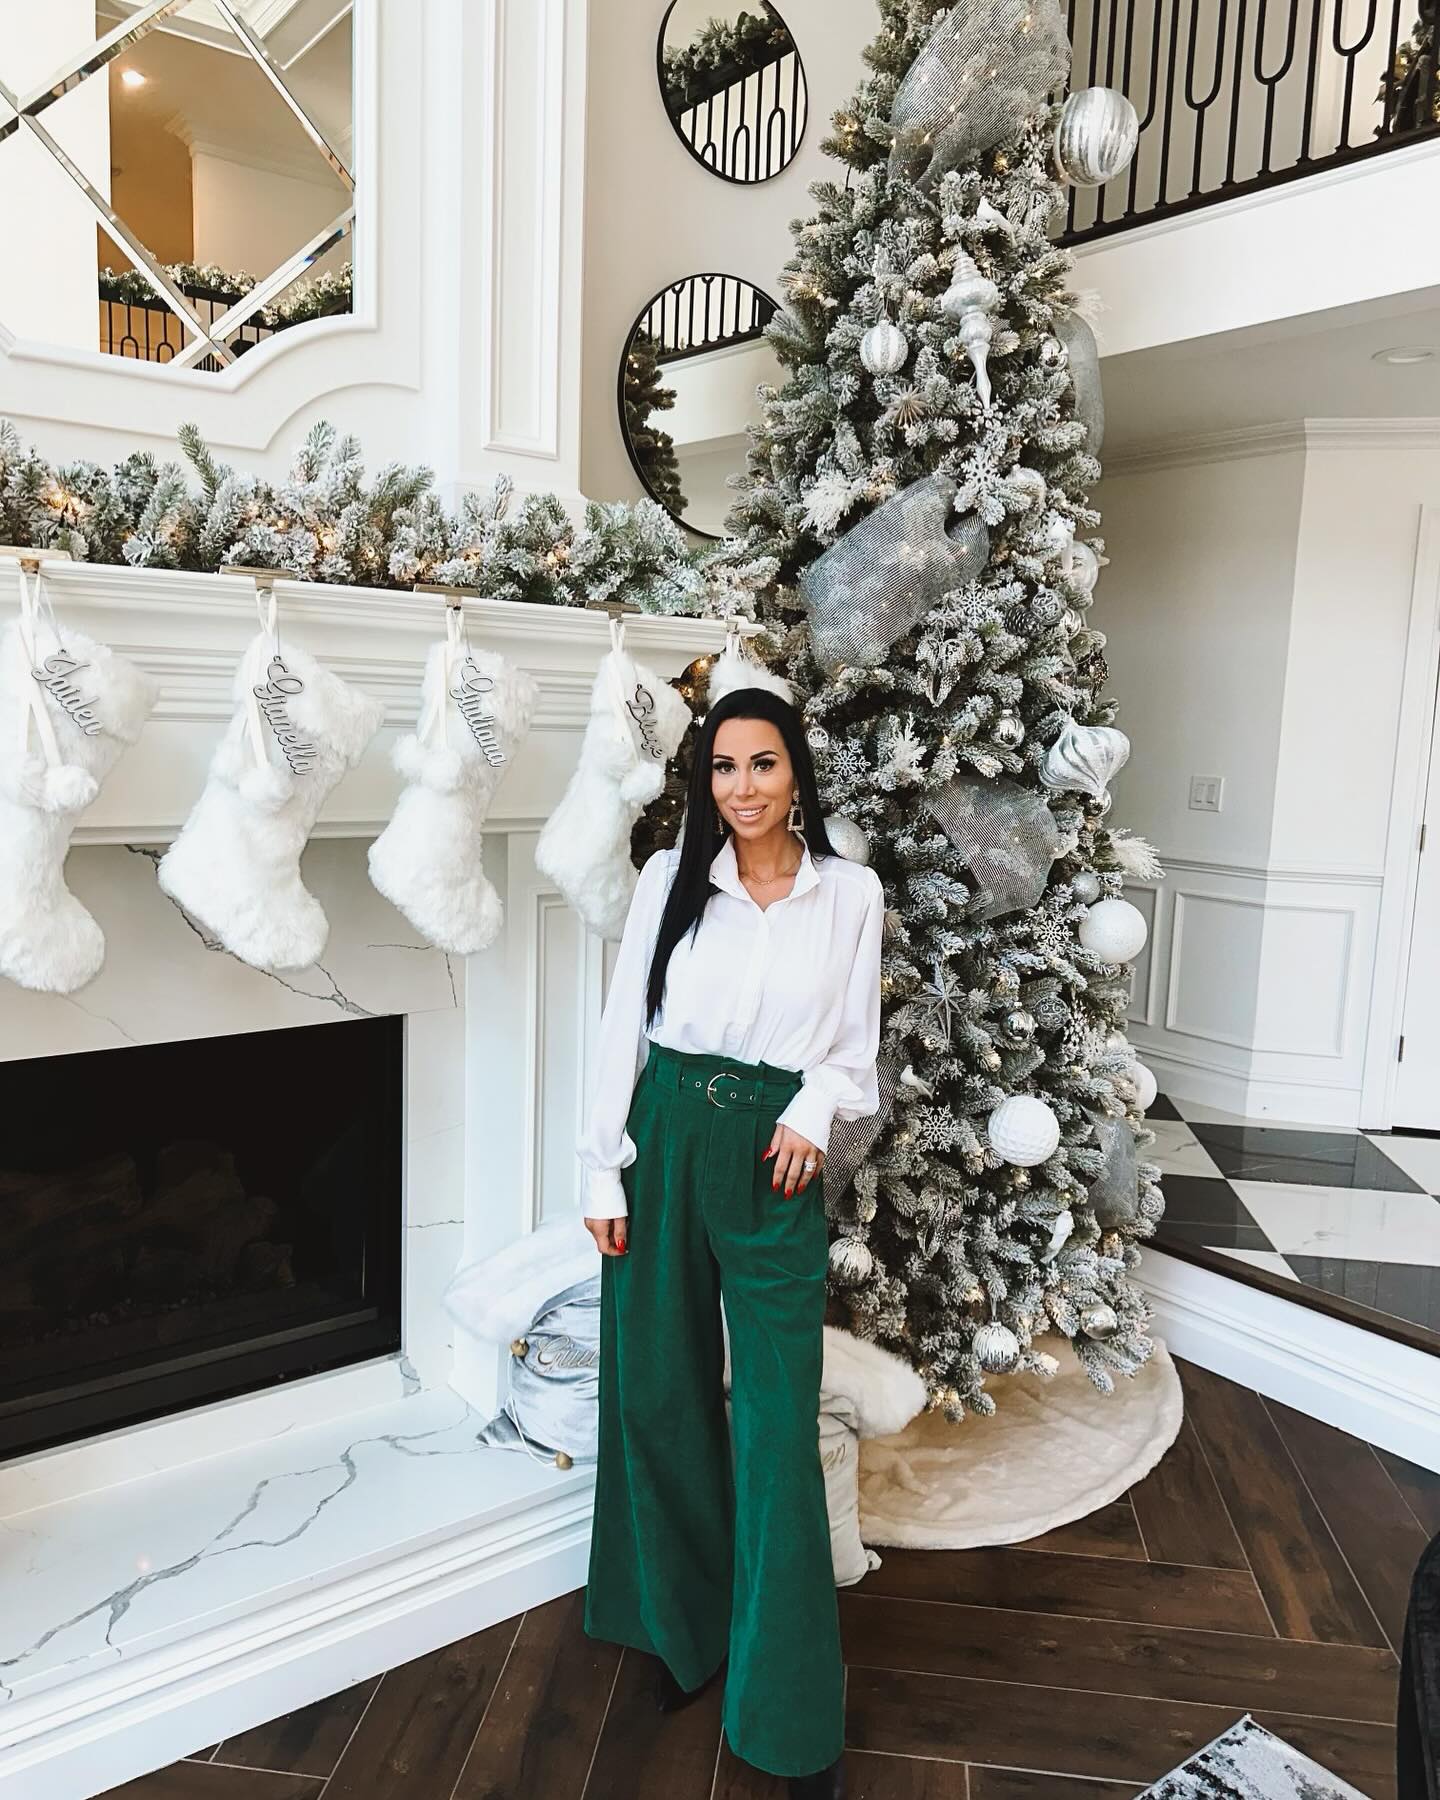 Rachel posed in front of her fireplace inside her over-one-million-dollar mansion